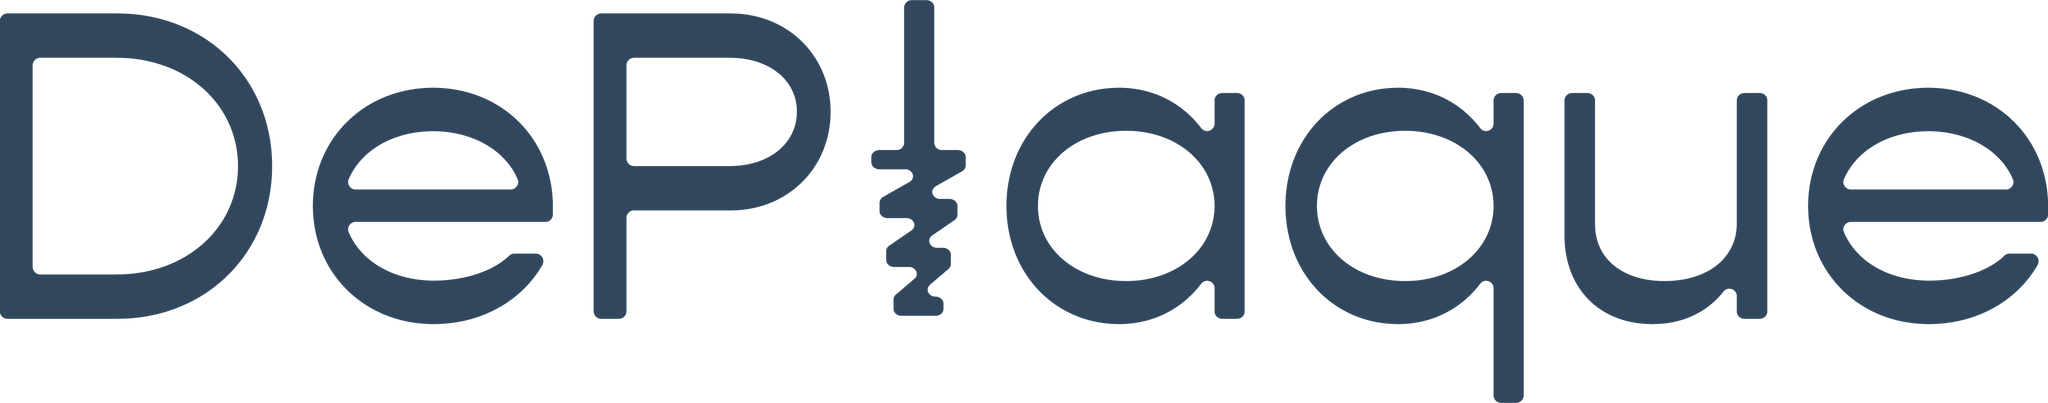 DePlaque logo, dark blue letters with a brush symbol in place of the “l”